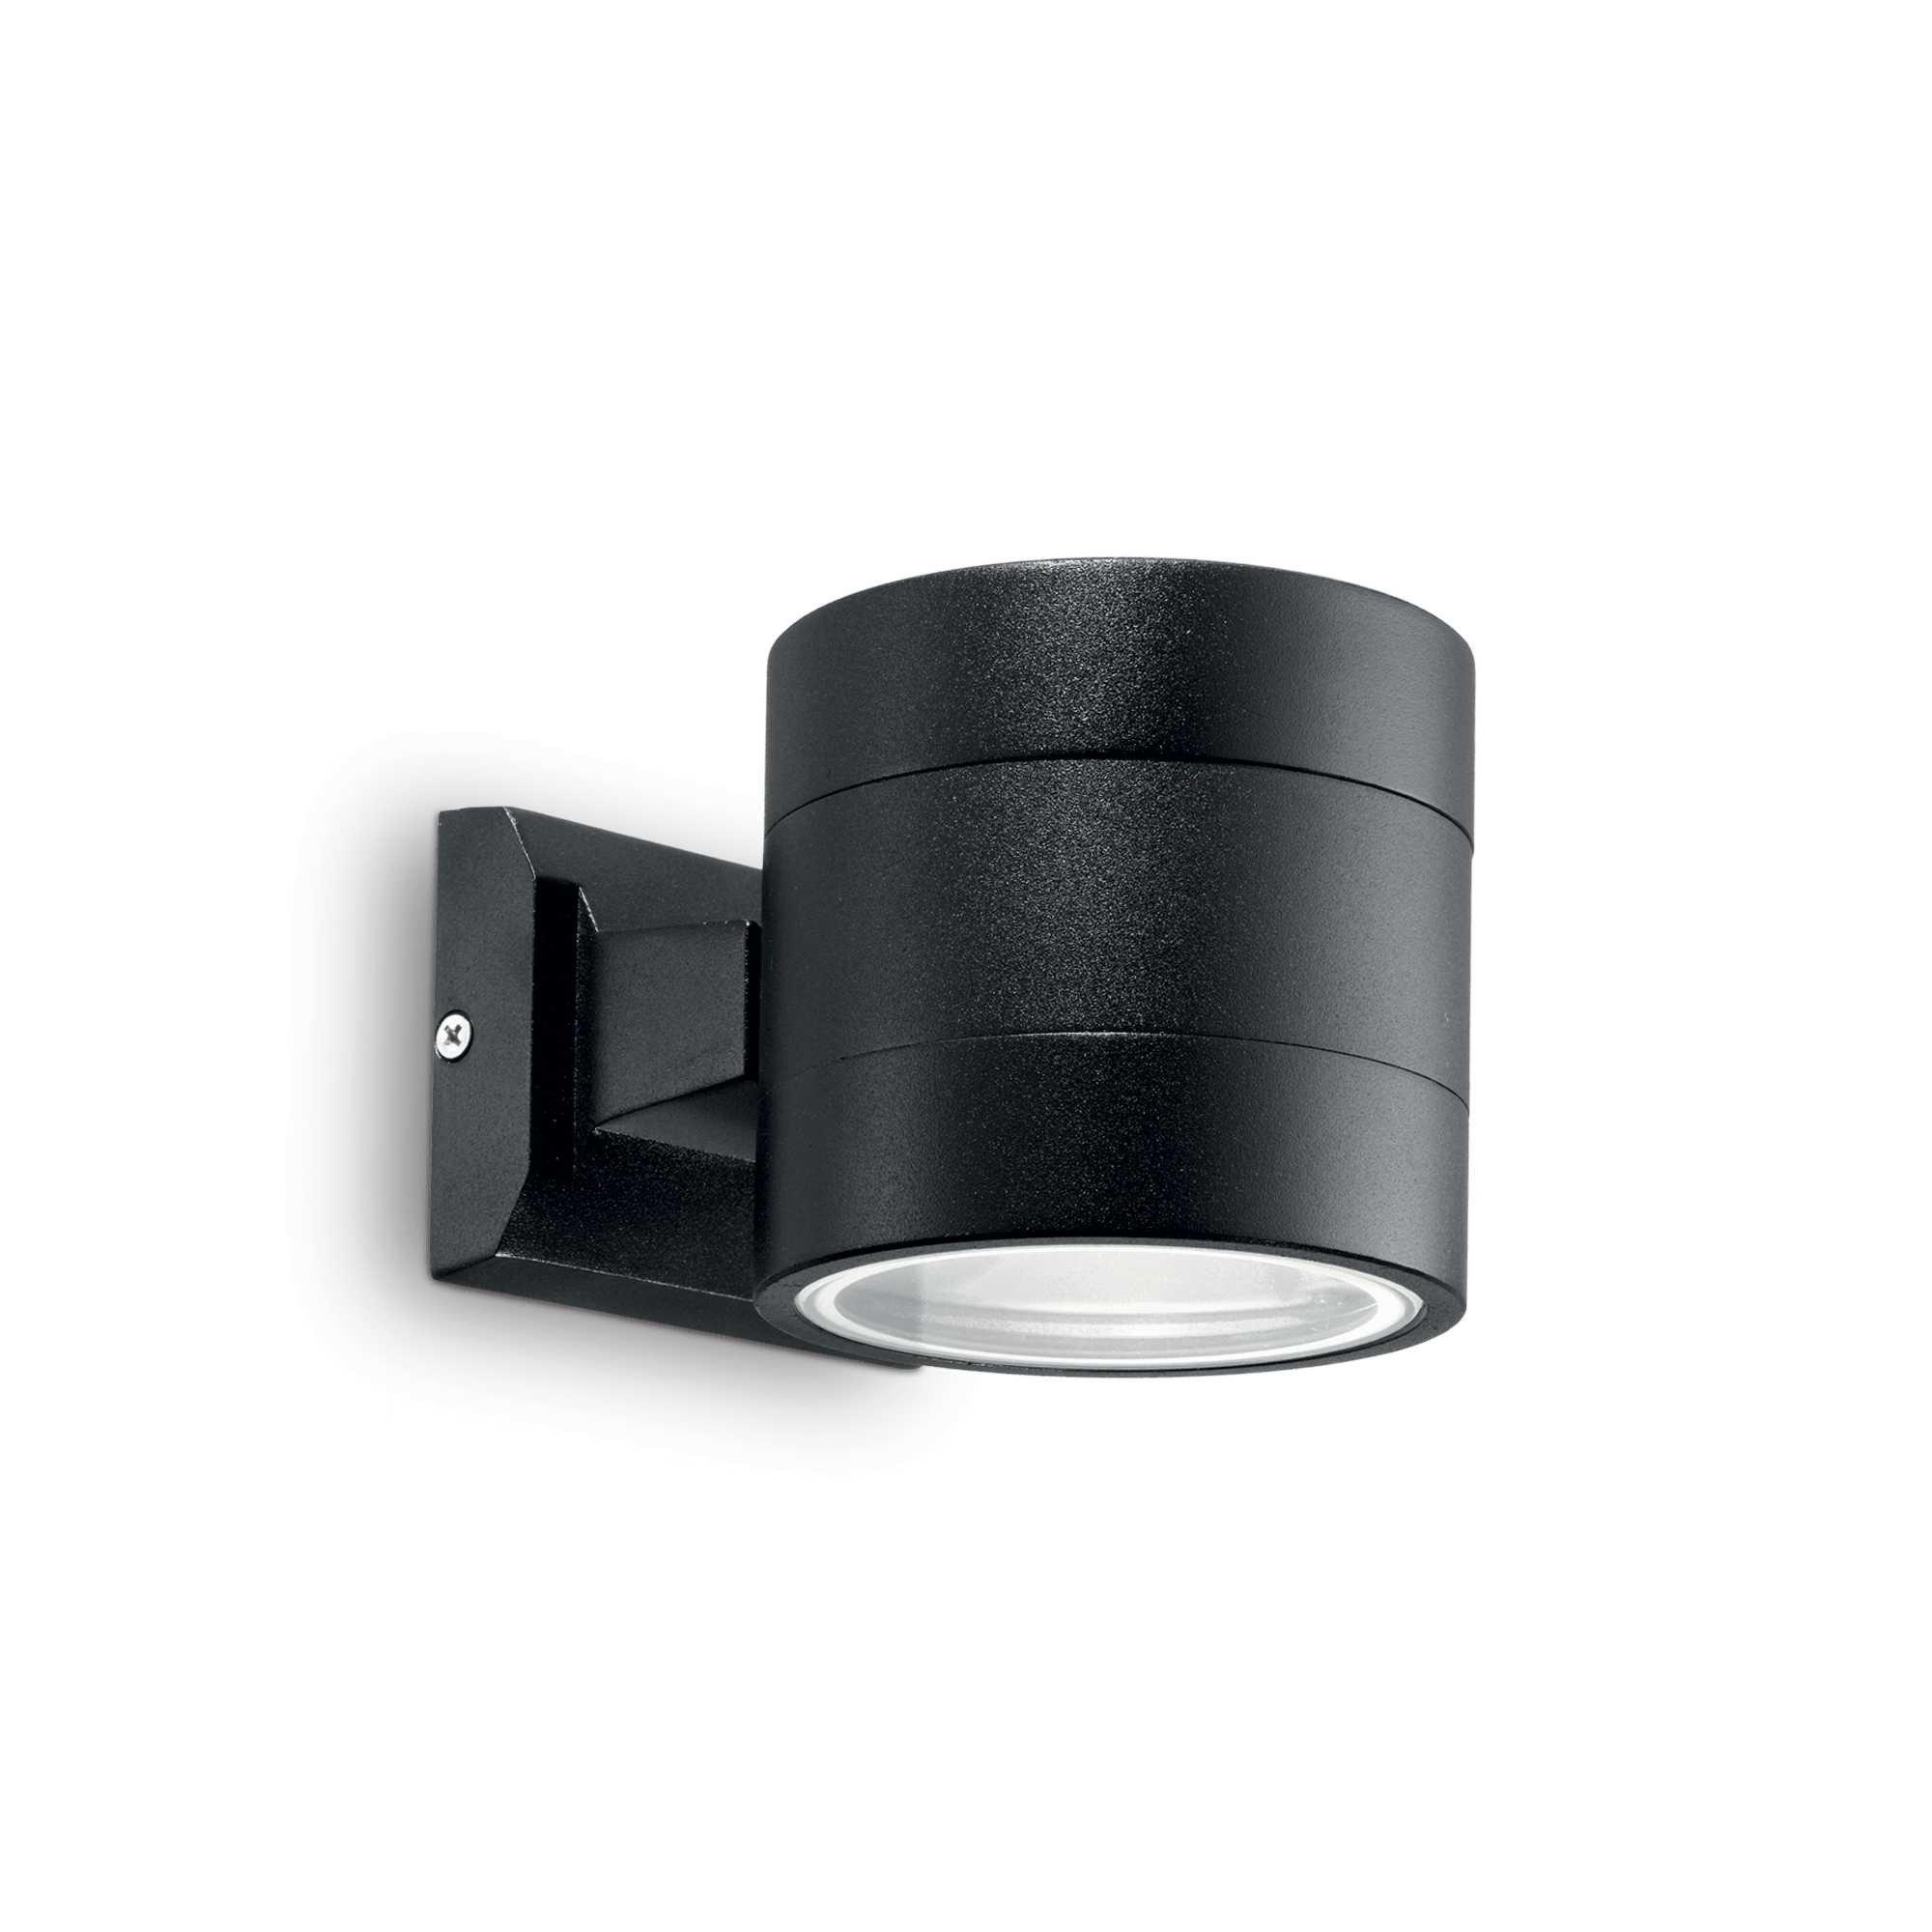 Snif Round 1 Light Outdoor Up Down Wall Light Black IP54 G9